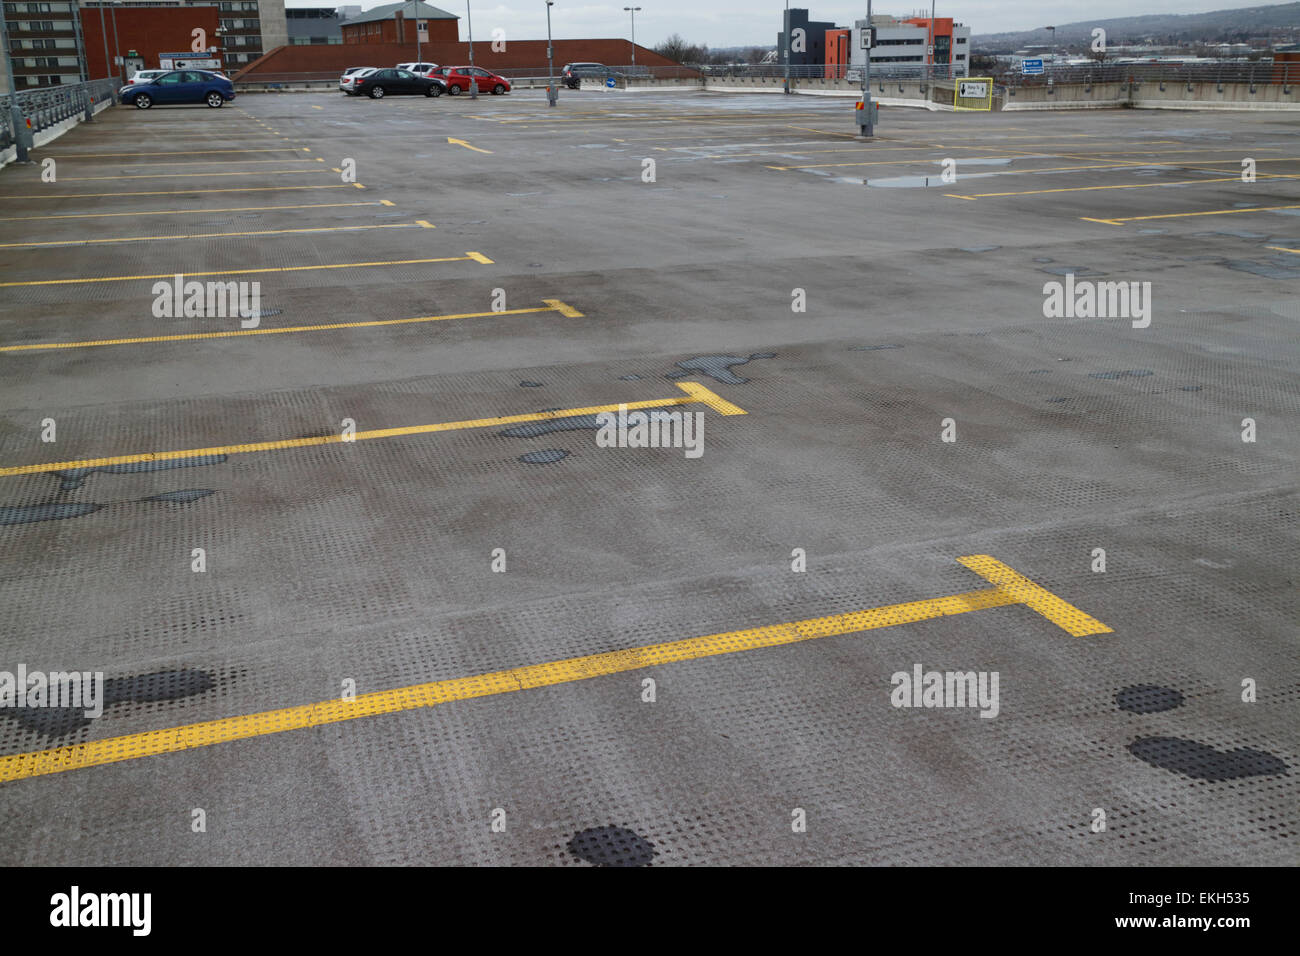 upper floor of a multi storey car park in the uk Stock Photo